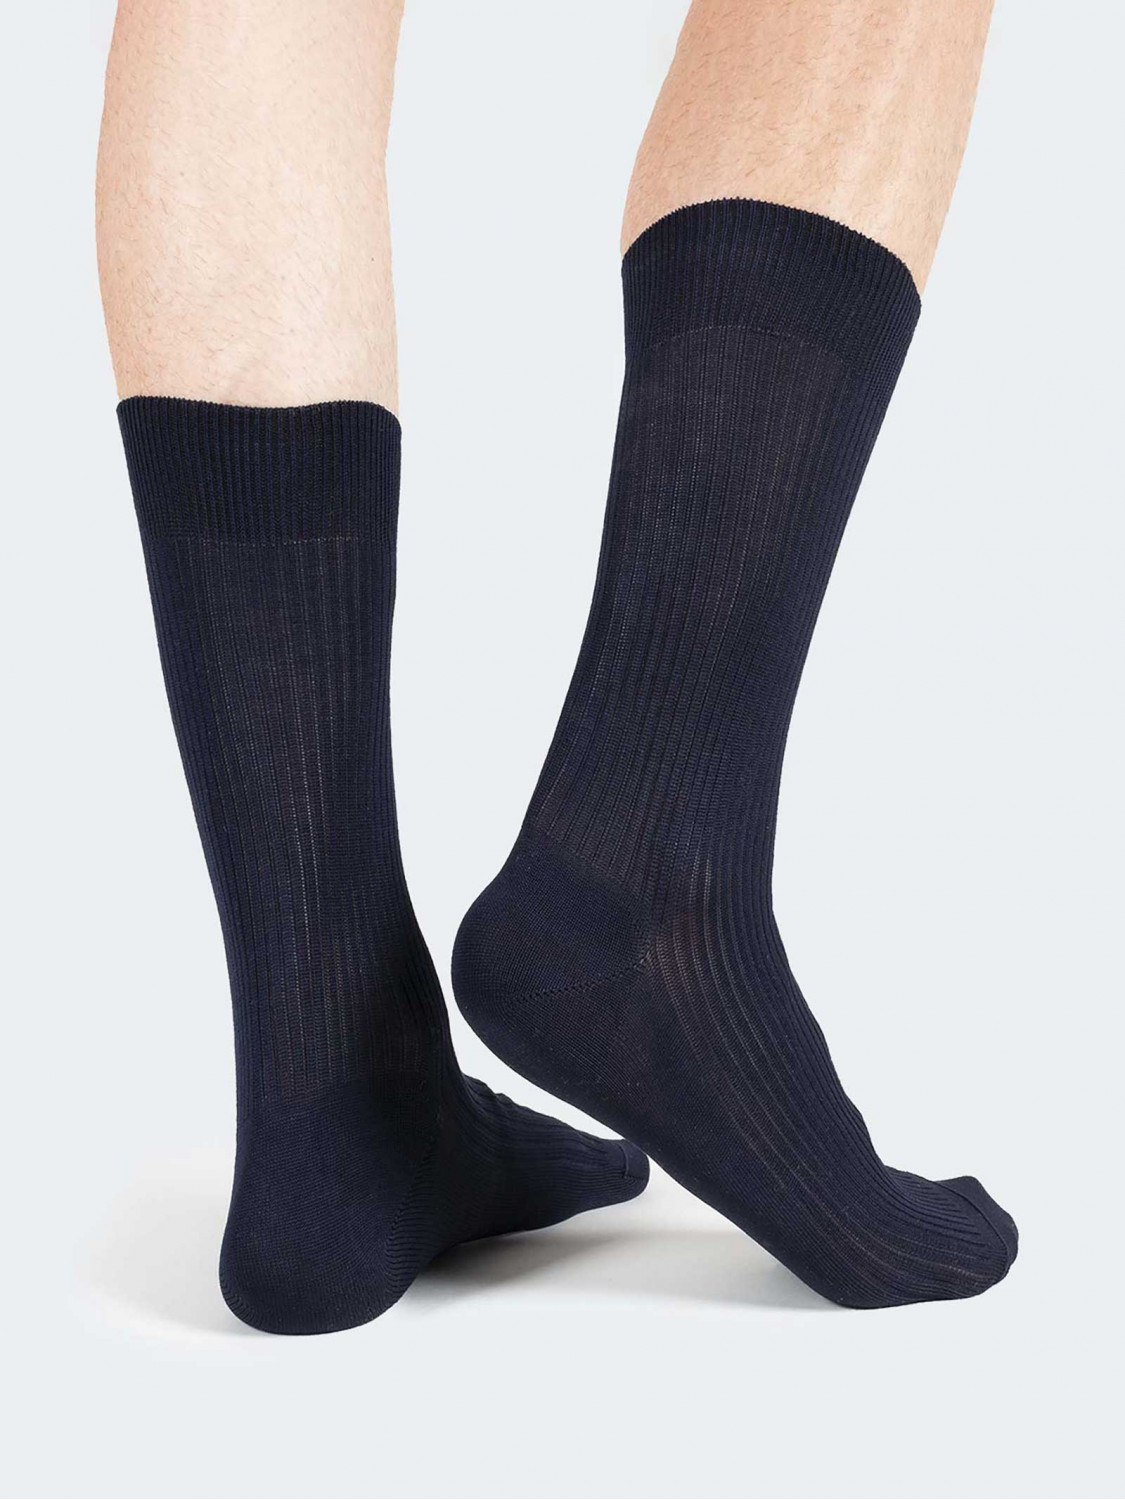 Ribbed cotton calf socks with elastic Scotland thread - Made in Italy